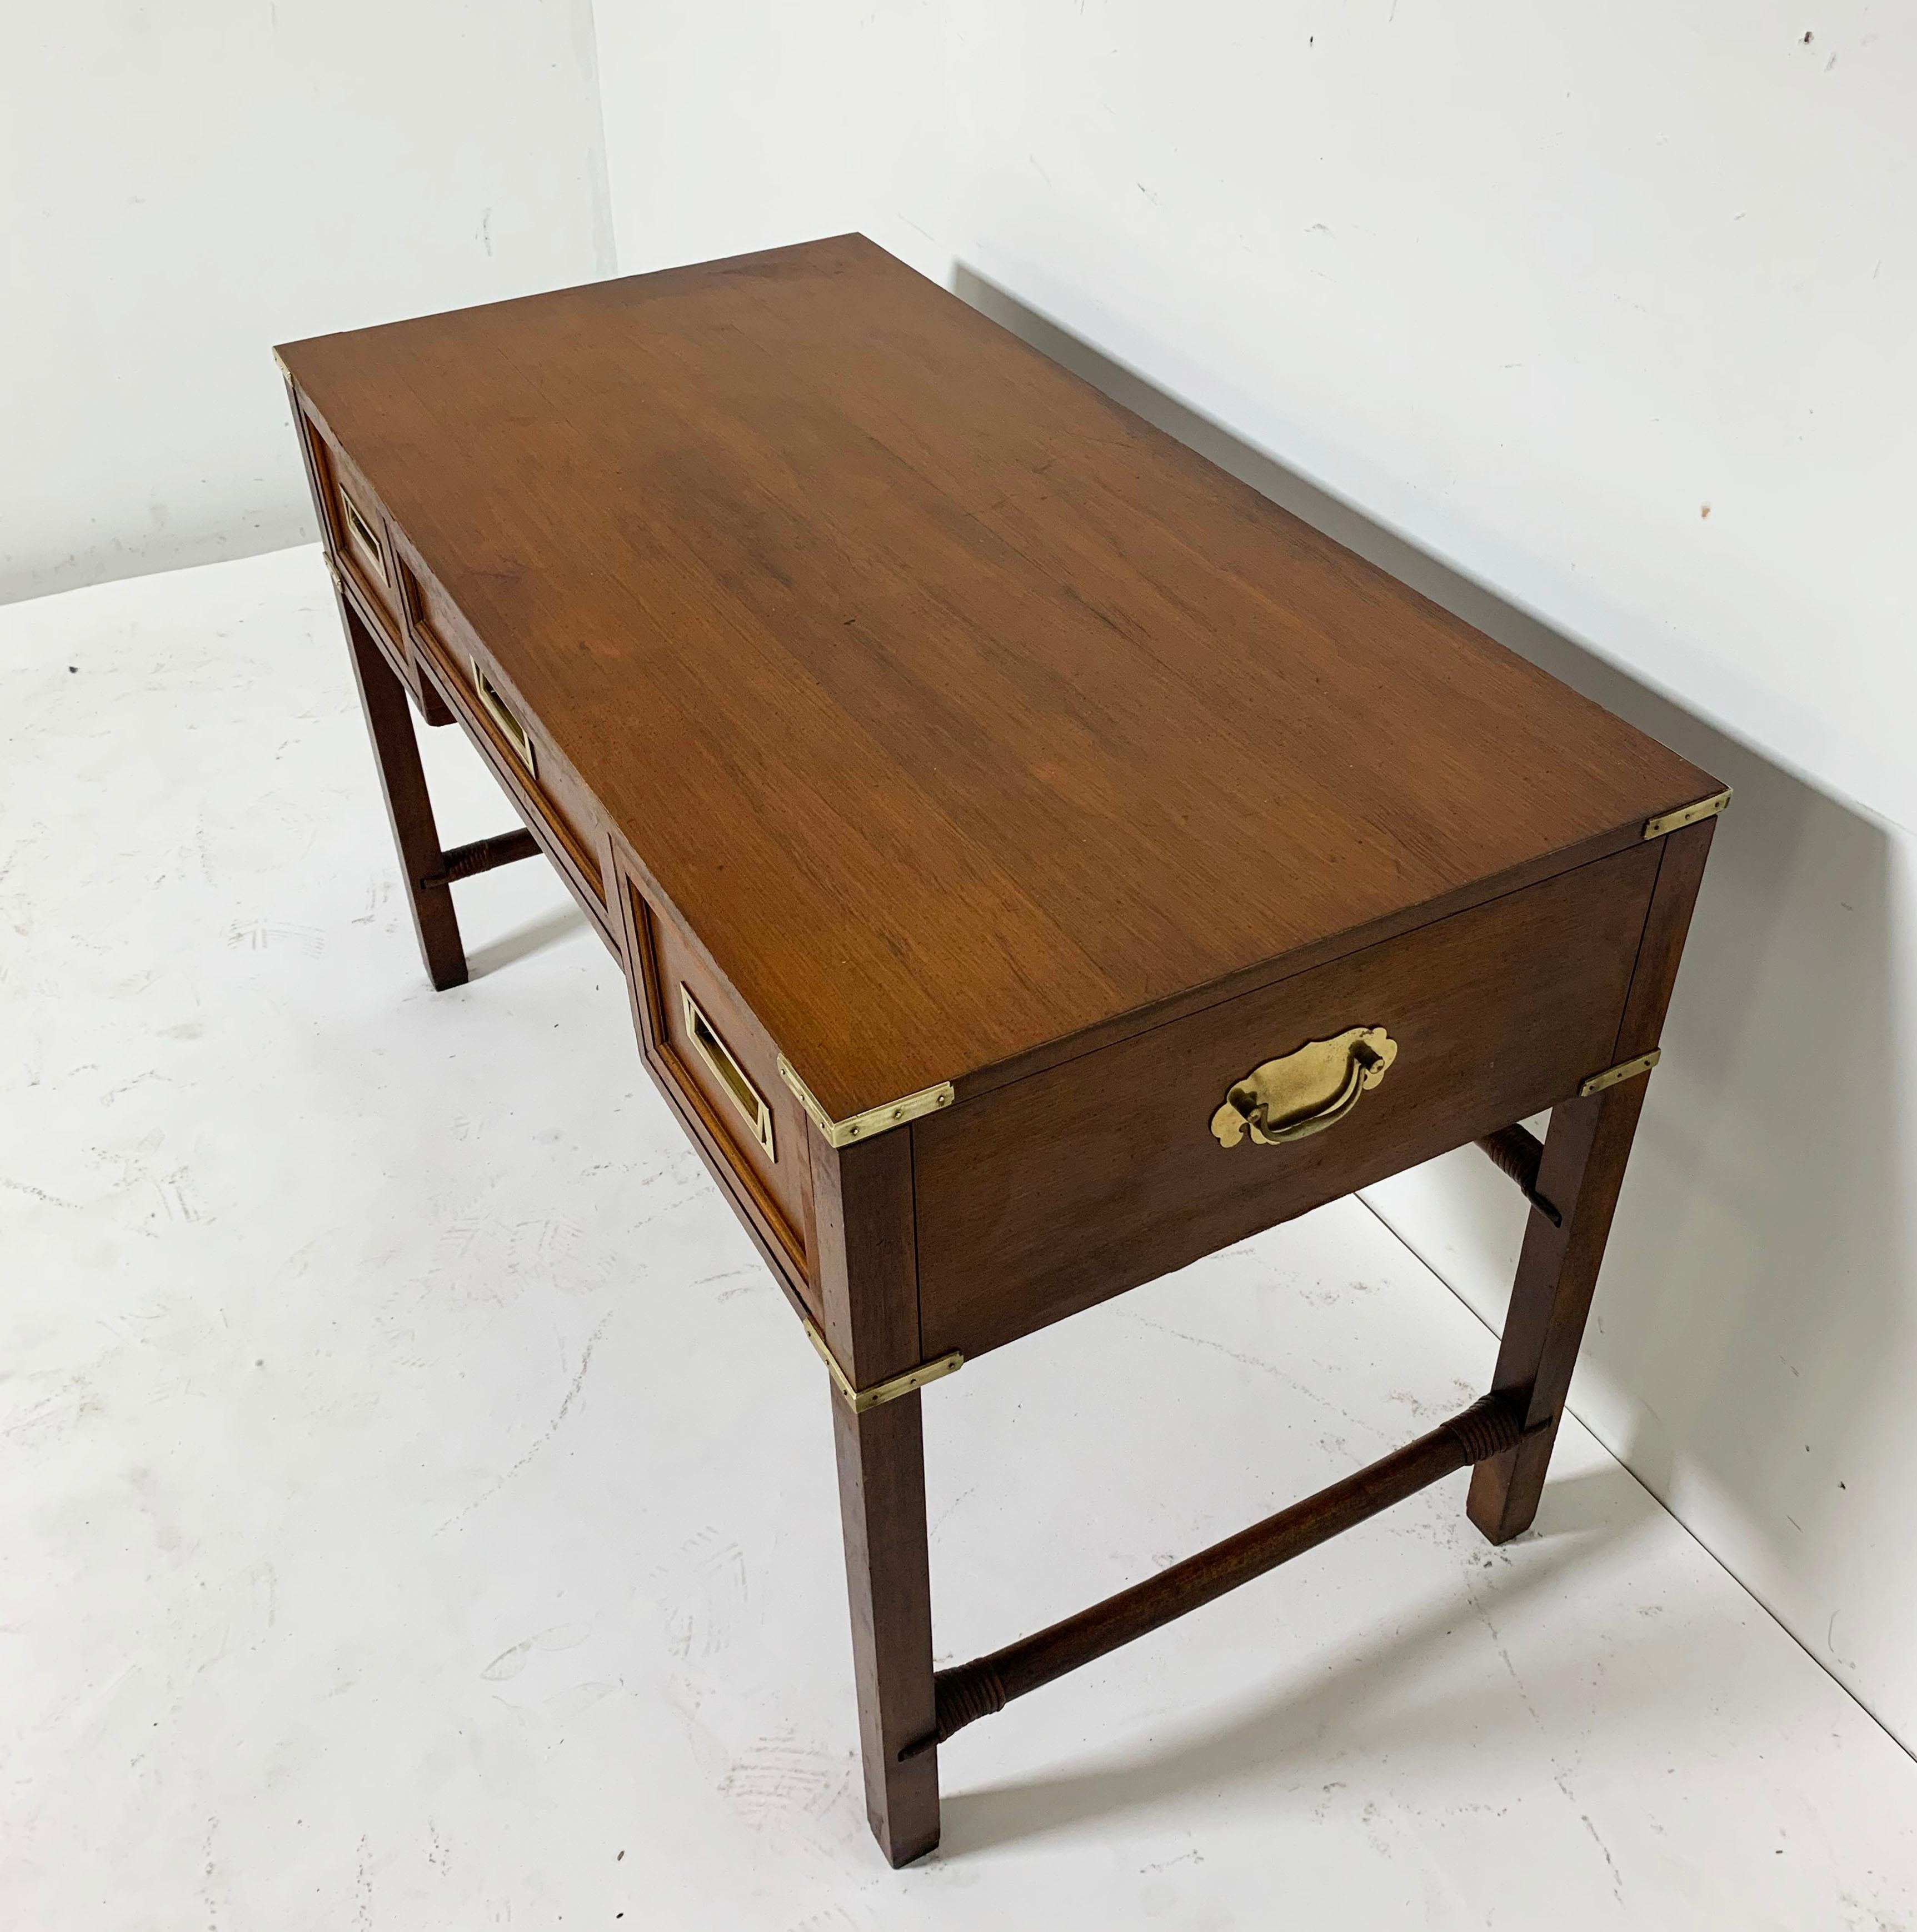 English mahogany writing desk with side lift handles in the campaign style, circa 1960s. Cane wrapped accents on the stretchers and brass sabots on all legs.